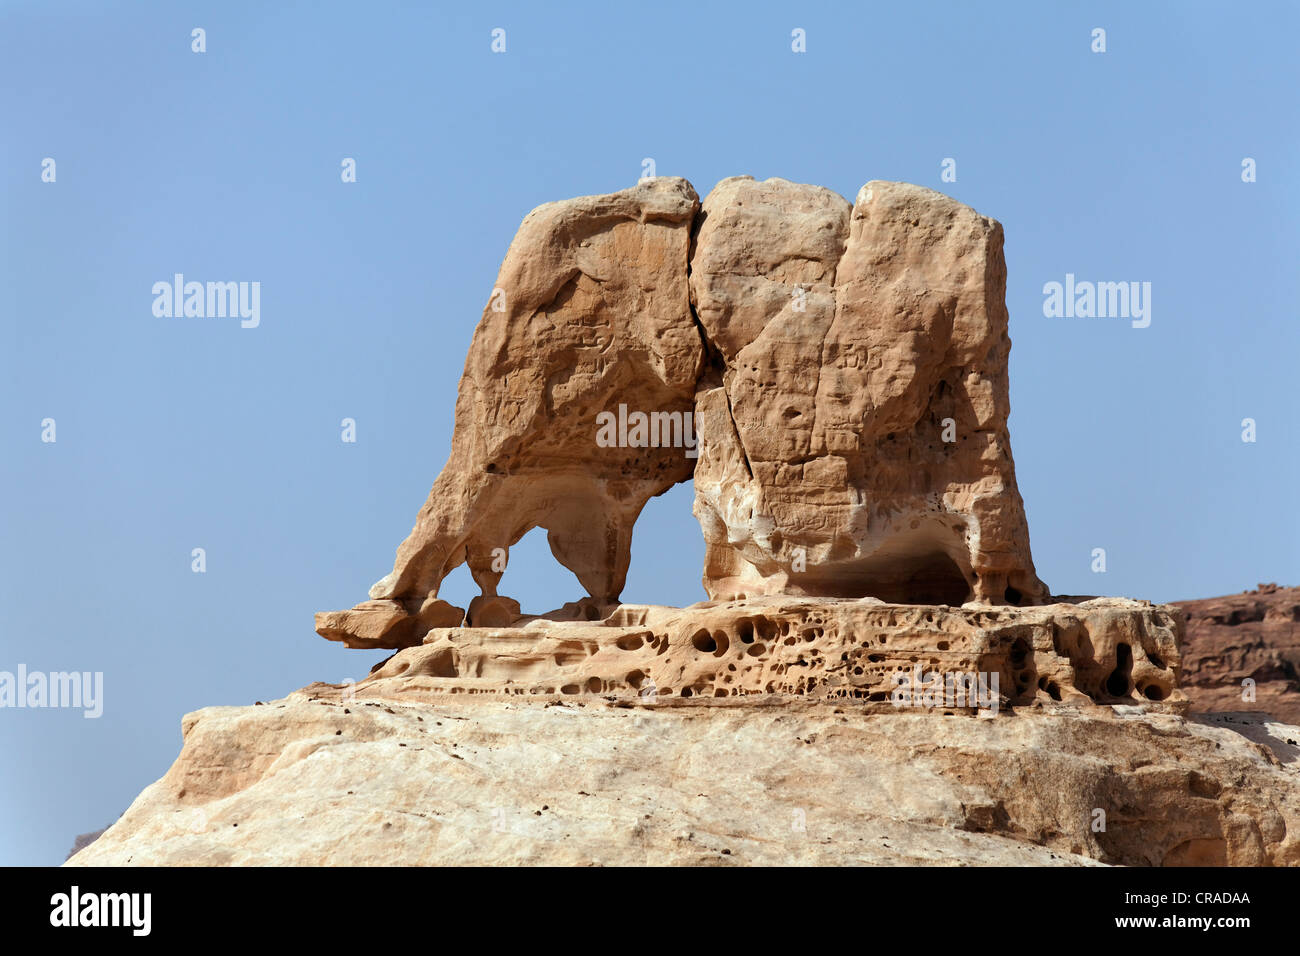 Elephant Rock near El Bared, natural stone sculpture, Little , the capital city of the Nabataeans, rock city Stock Photo